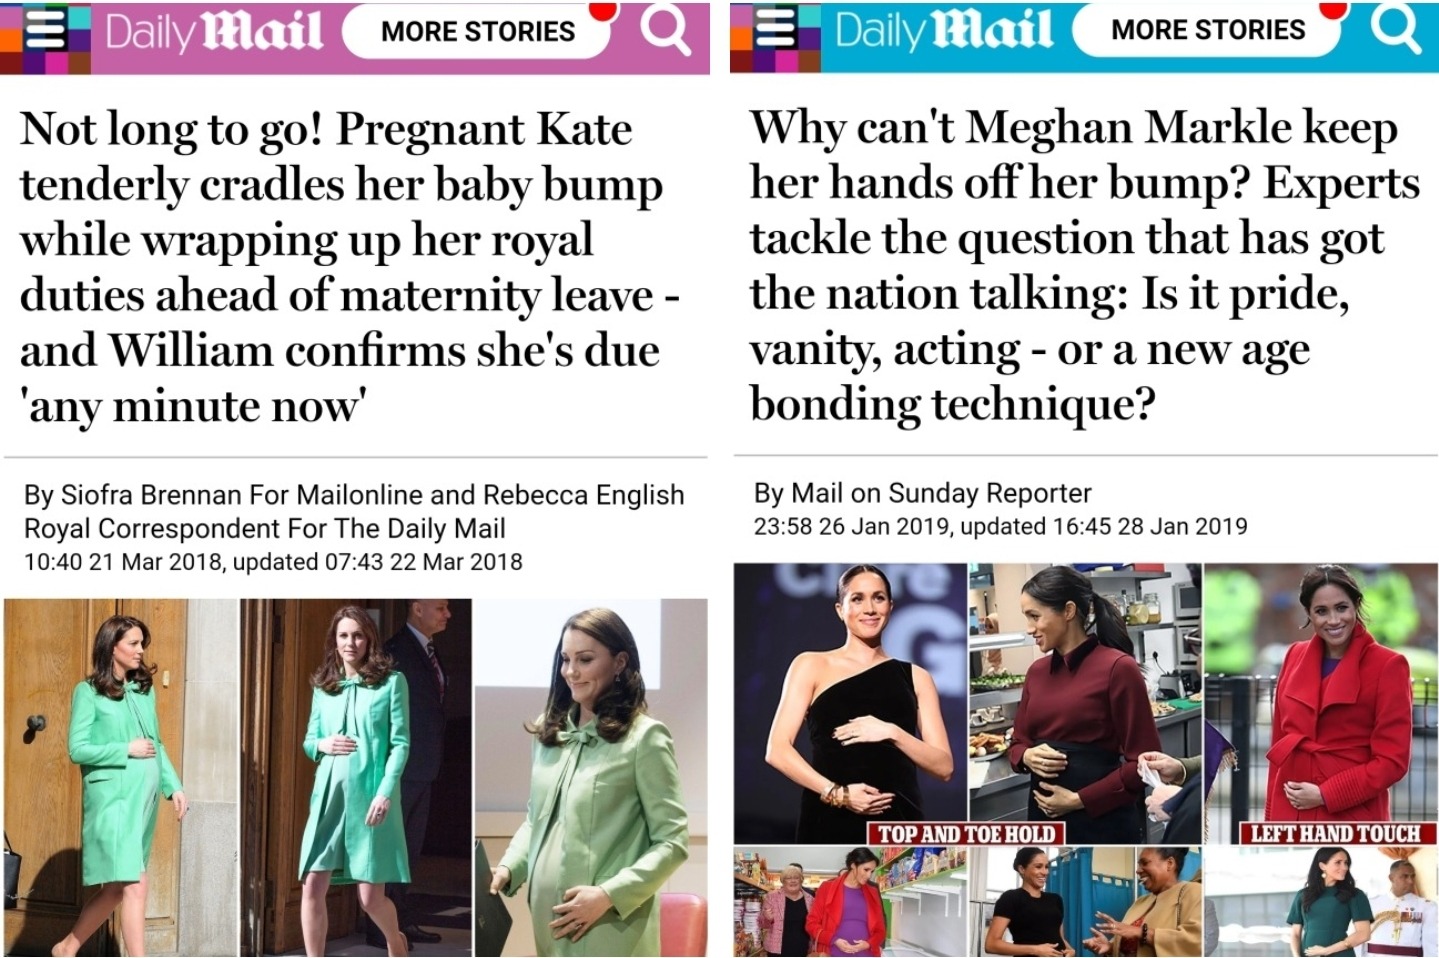 clothing - E Daily Mail More Stories Q E Daily Mail More Stories Q Not long to go! Pregnant Kate tenderly cradles her baby bump while wrapping up her royal duties ahead of maternity leave and William confirms she's due 'any minute now' Why can't Meghan Ma